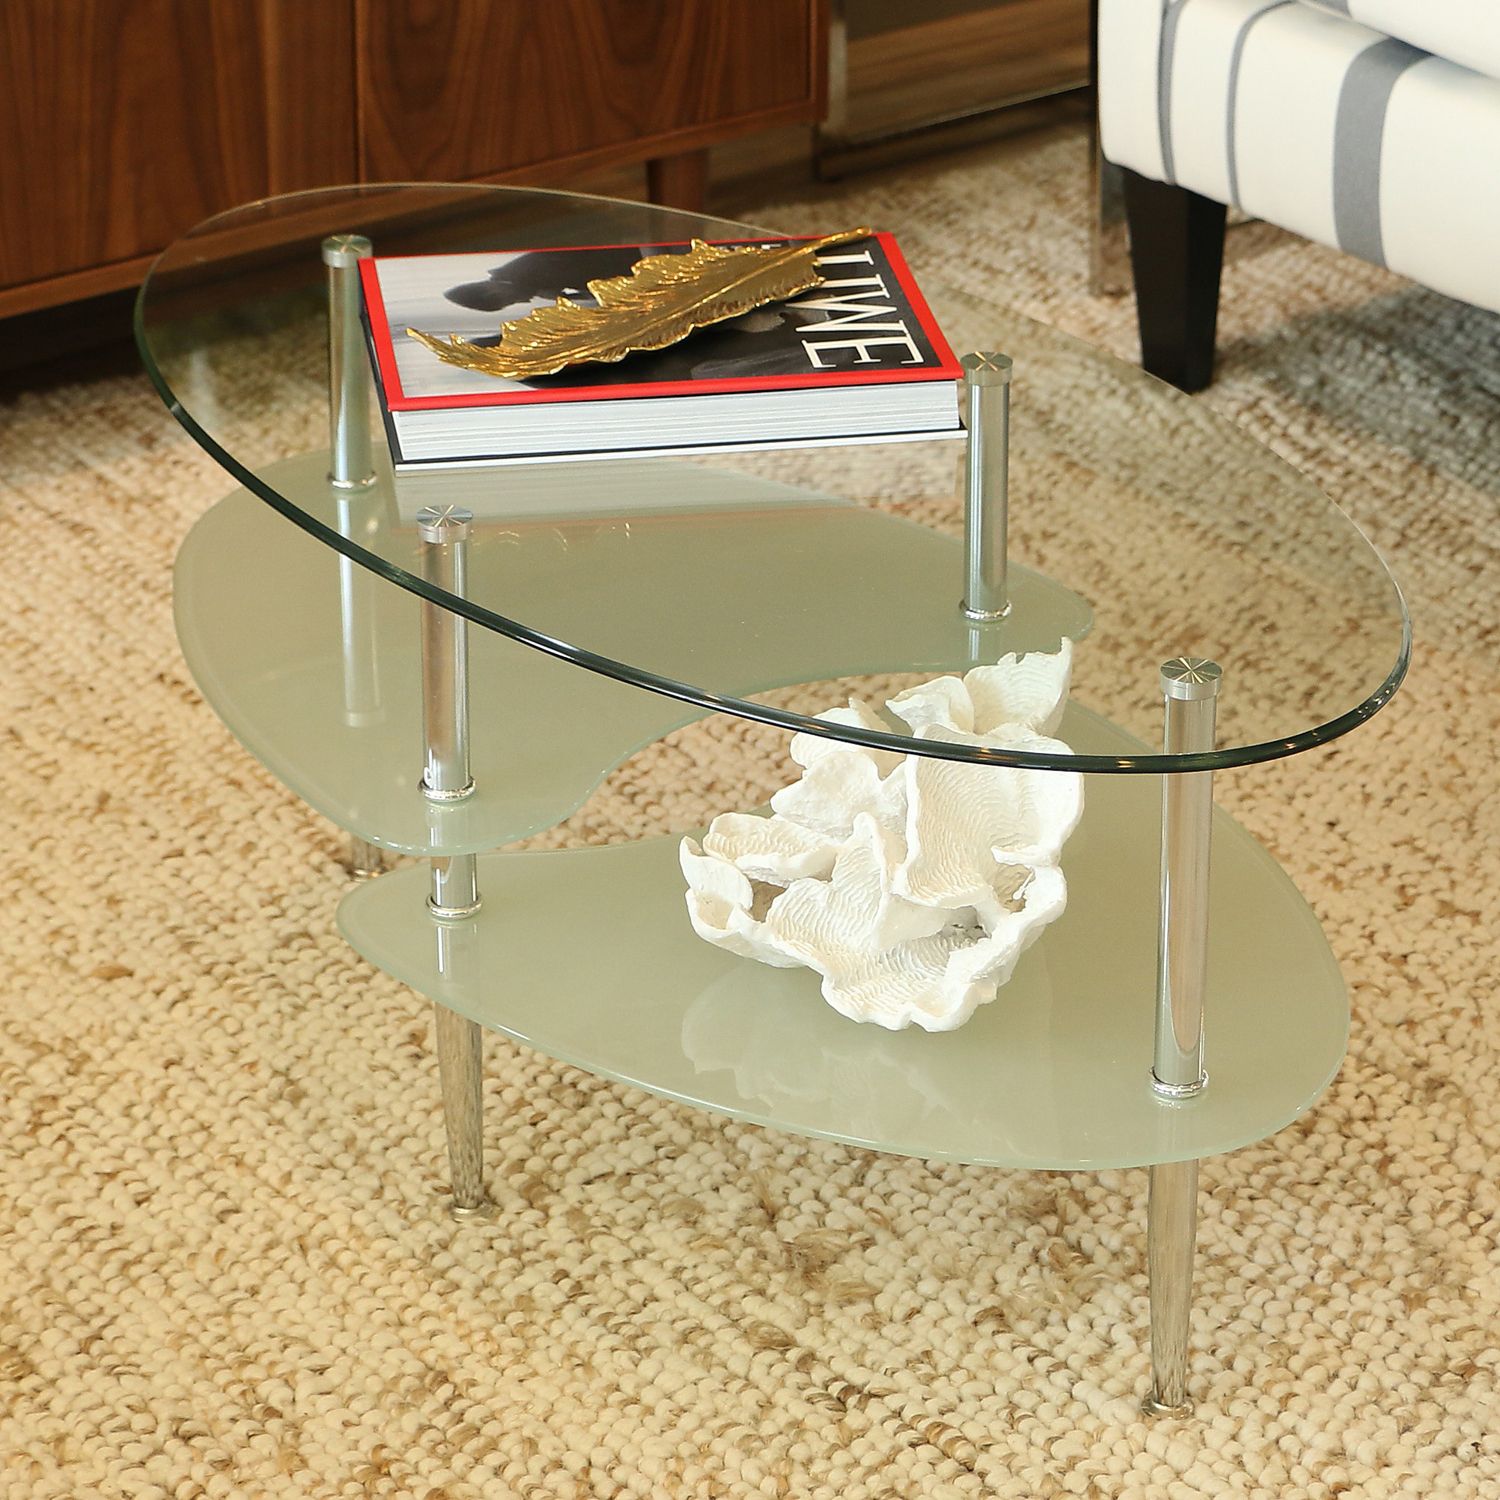 Oval Glass Coffee Table With Chrome Legs – Pier1 Imports In Famous Chrome Coffee Tables (View 6 of 20)